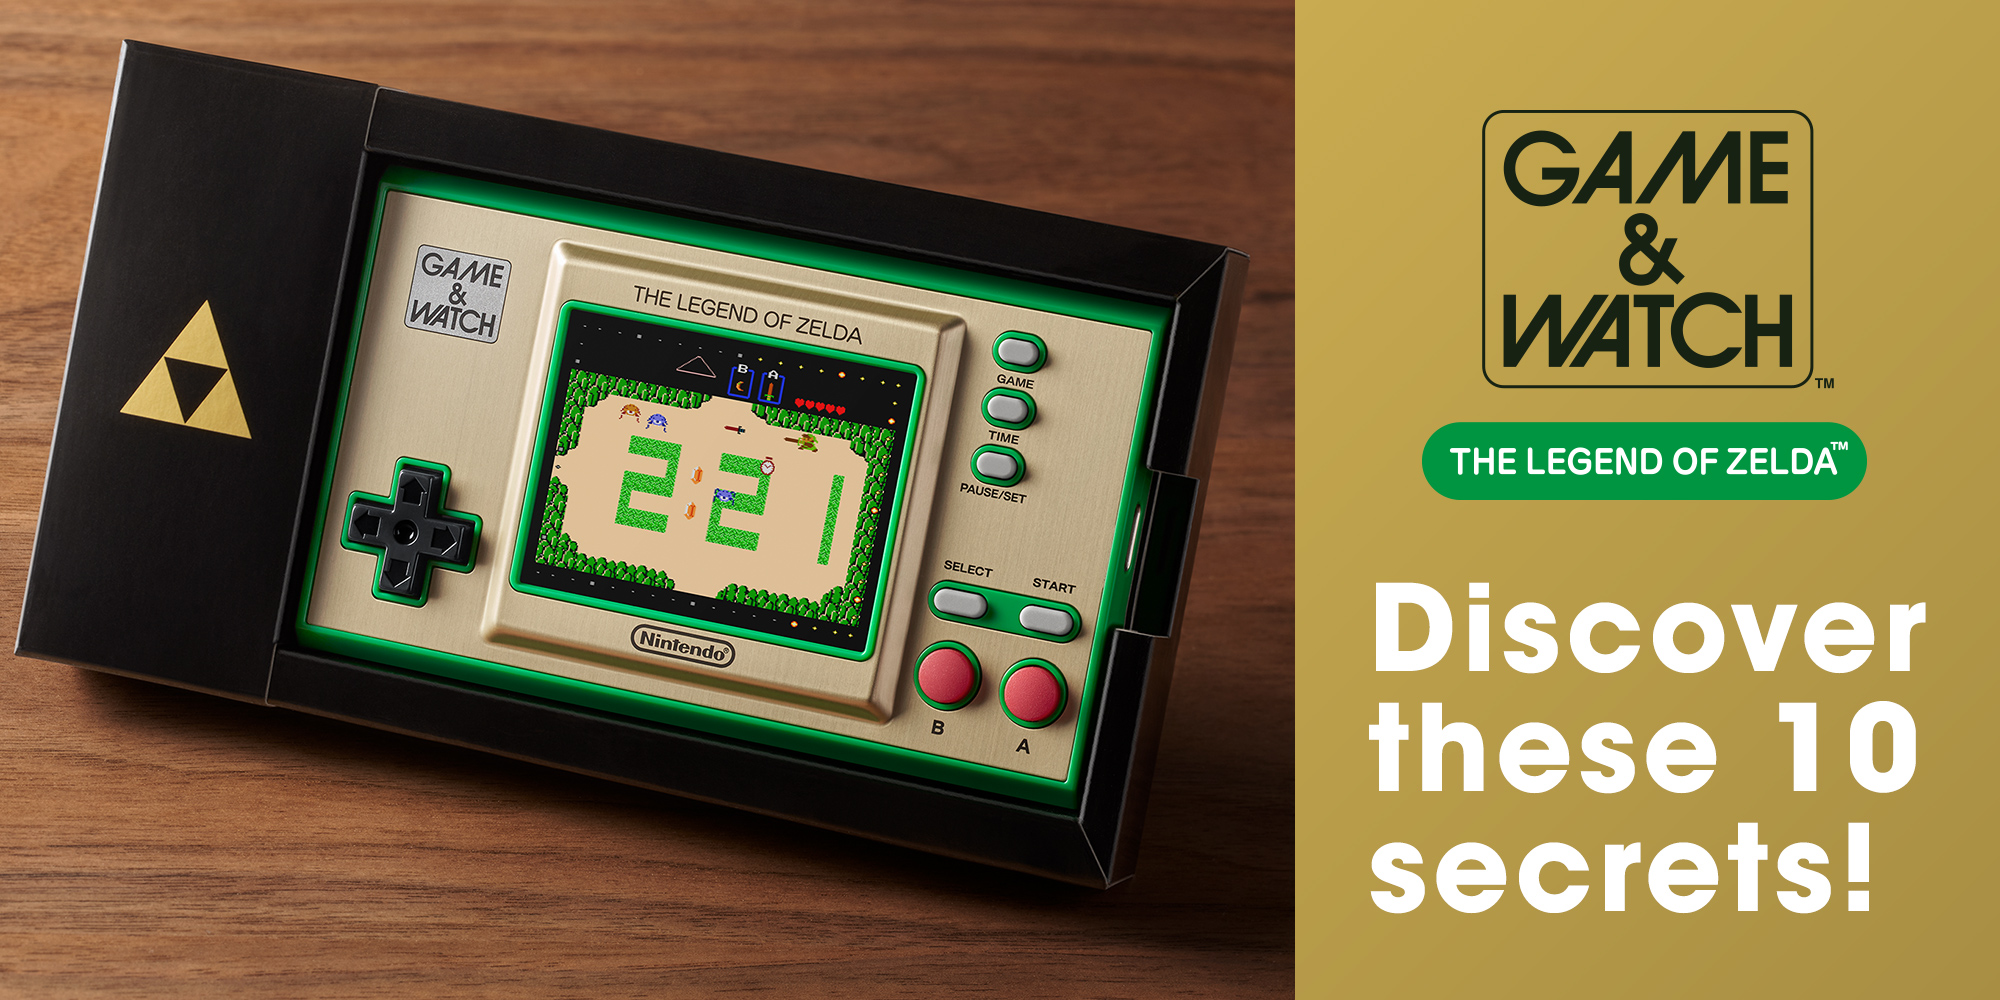 10 secrets to discover with Game & Watch: The Legend of Zelda!